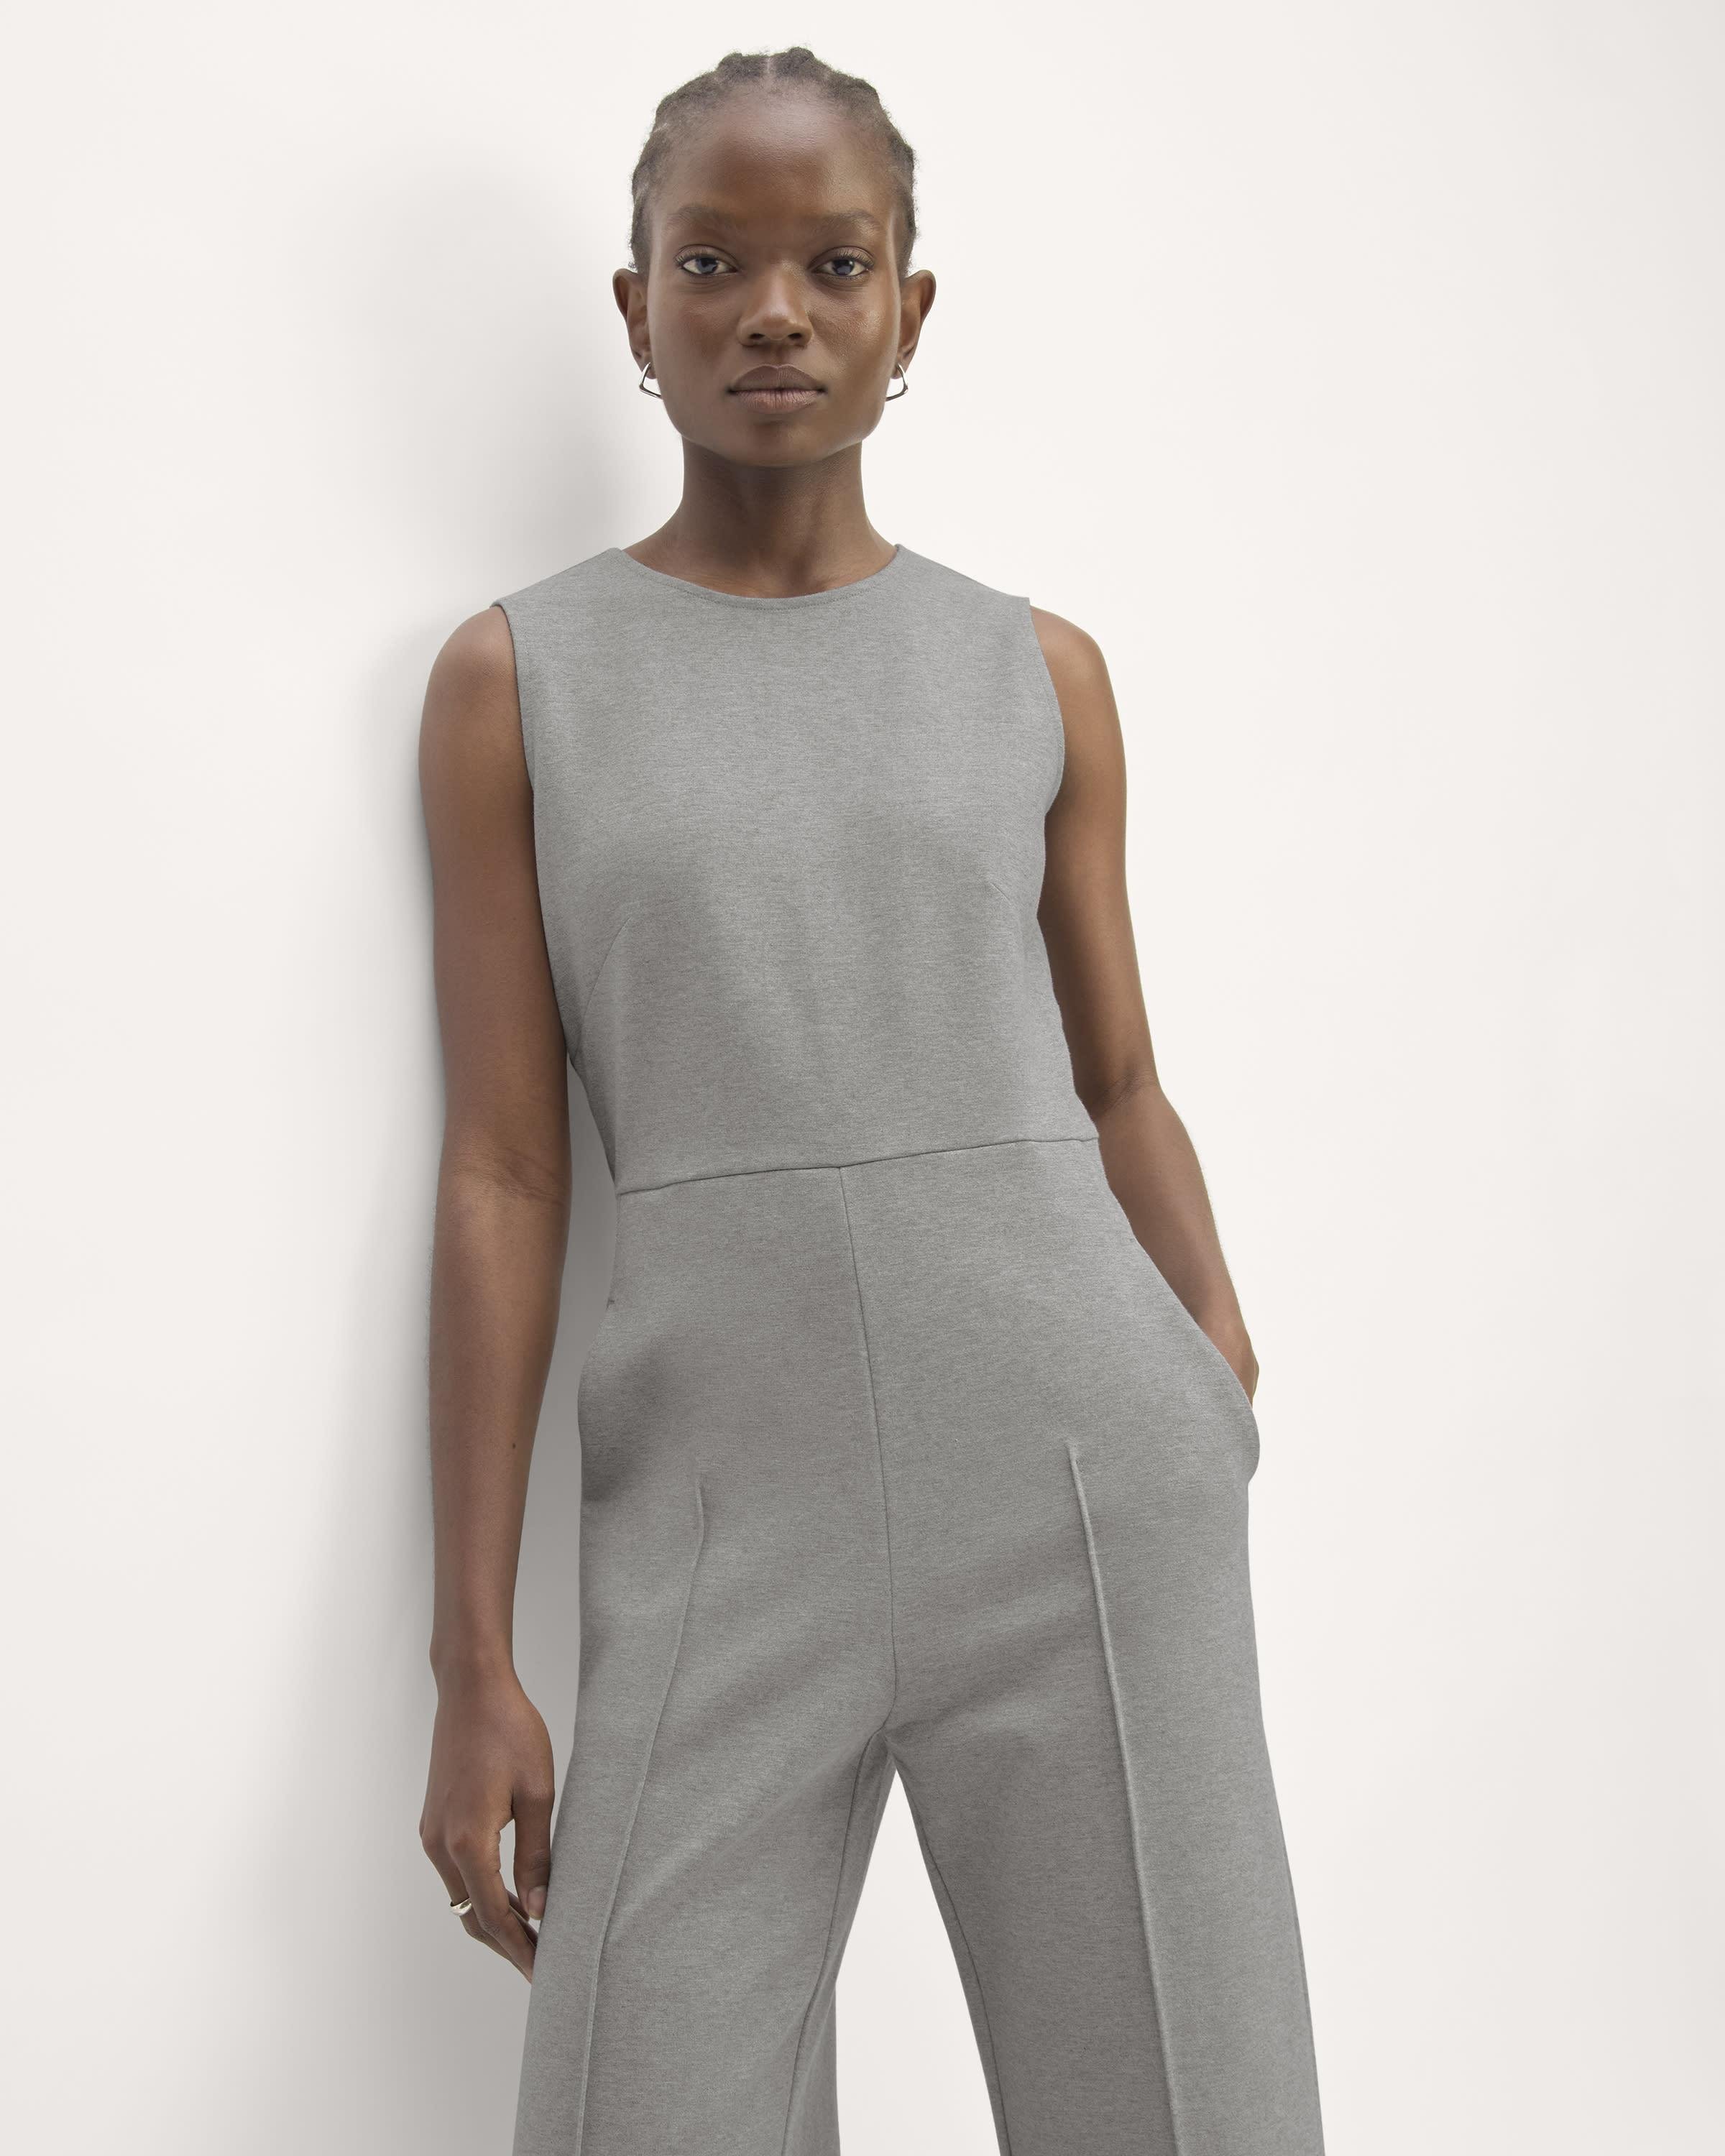 The Dream Sleeveless Jumpsuit by EVERLANE